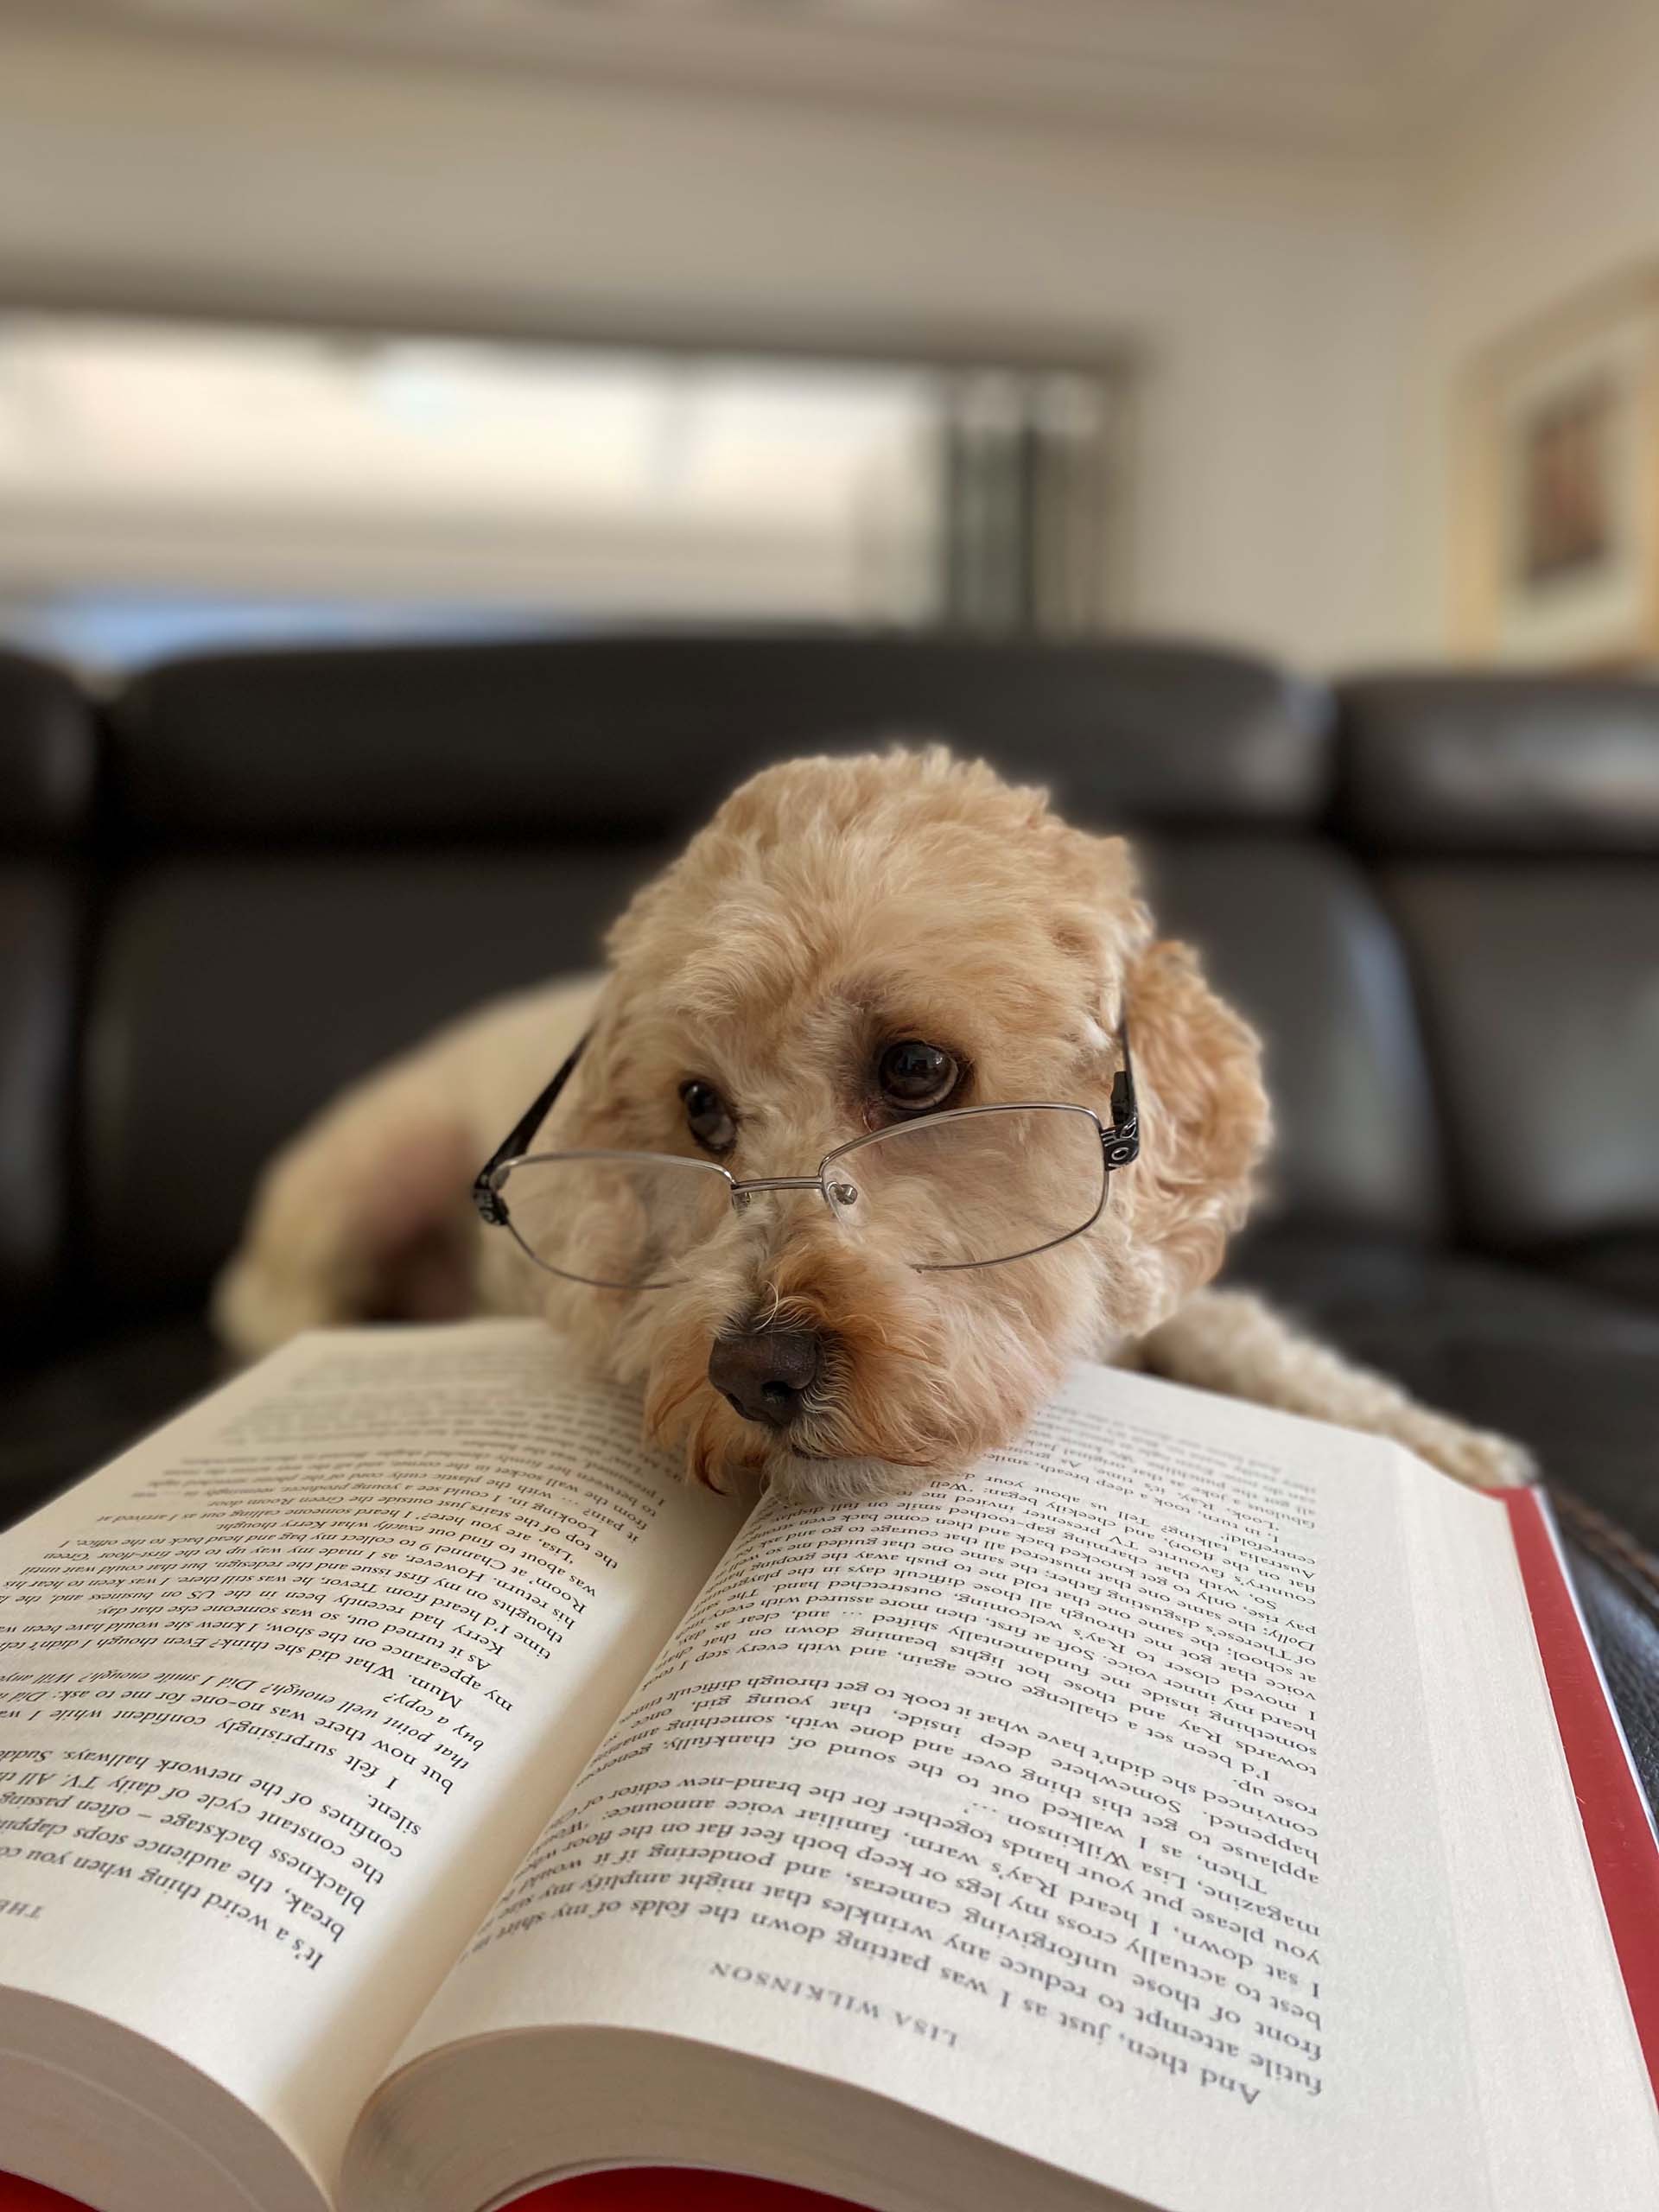 A cute dog with head in a book